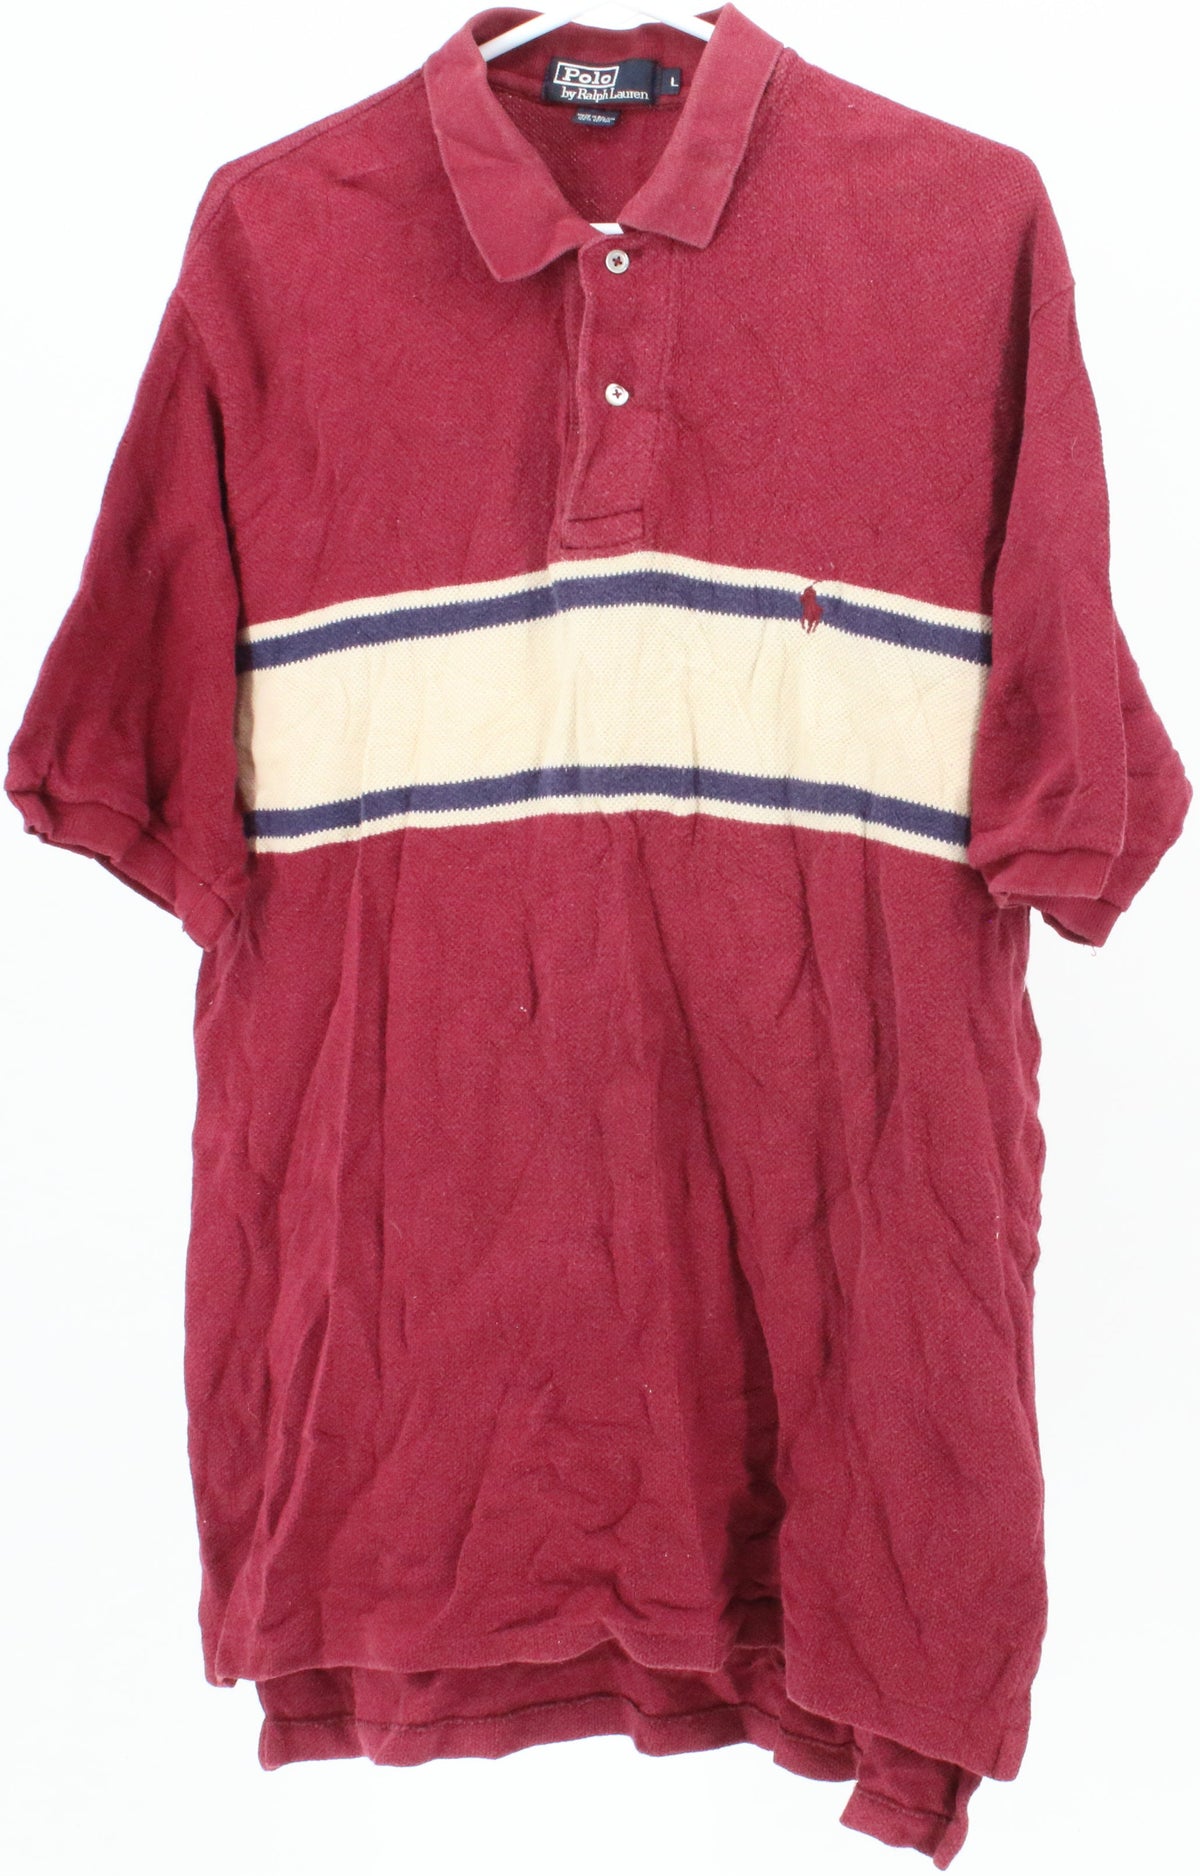 Polo by Ralph Lauren Burgundy and Off White Textured Golf Shirt